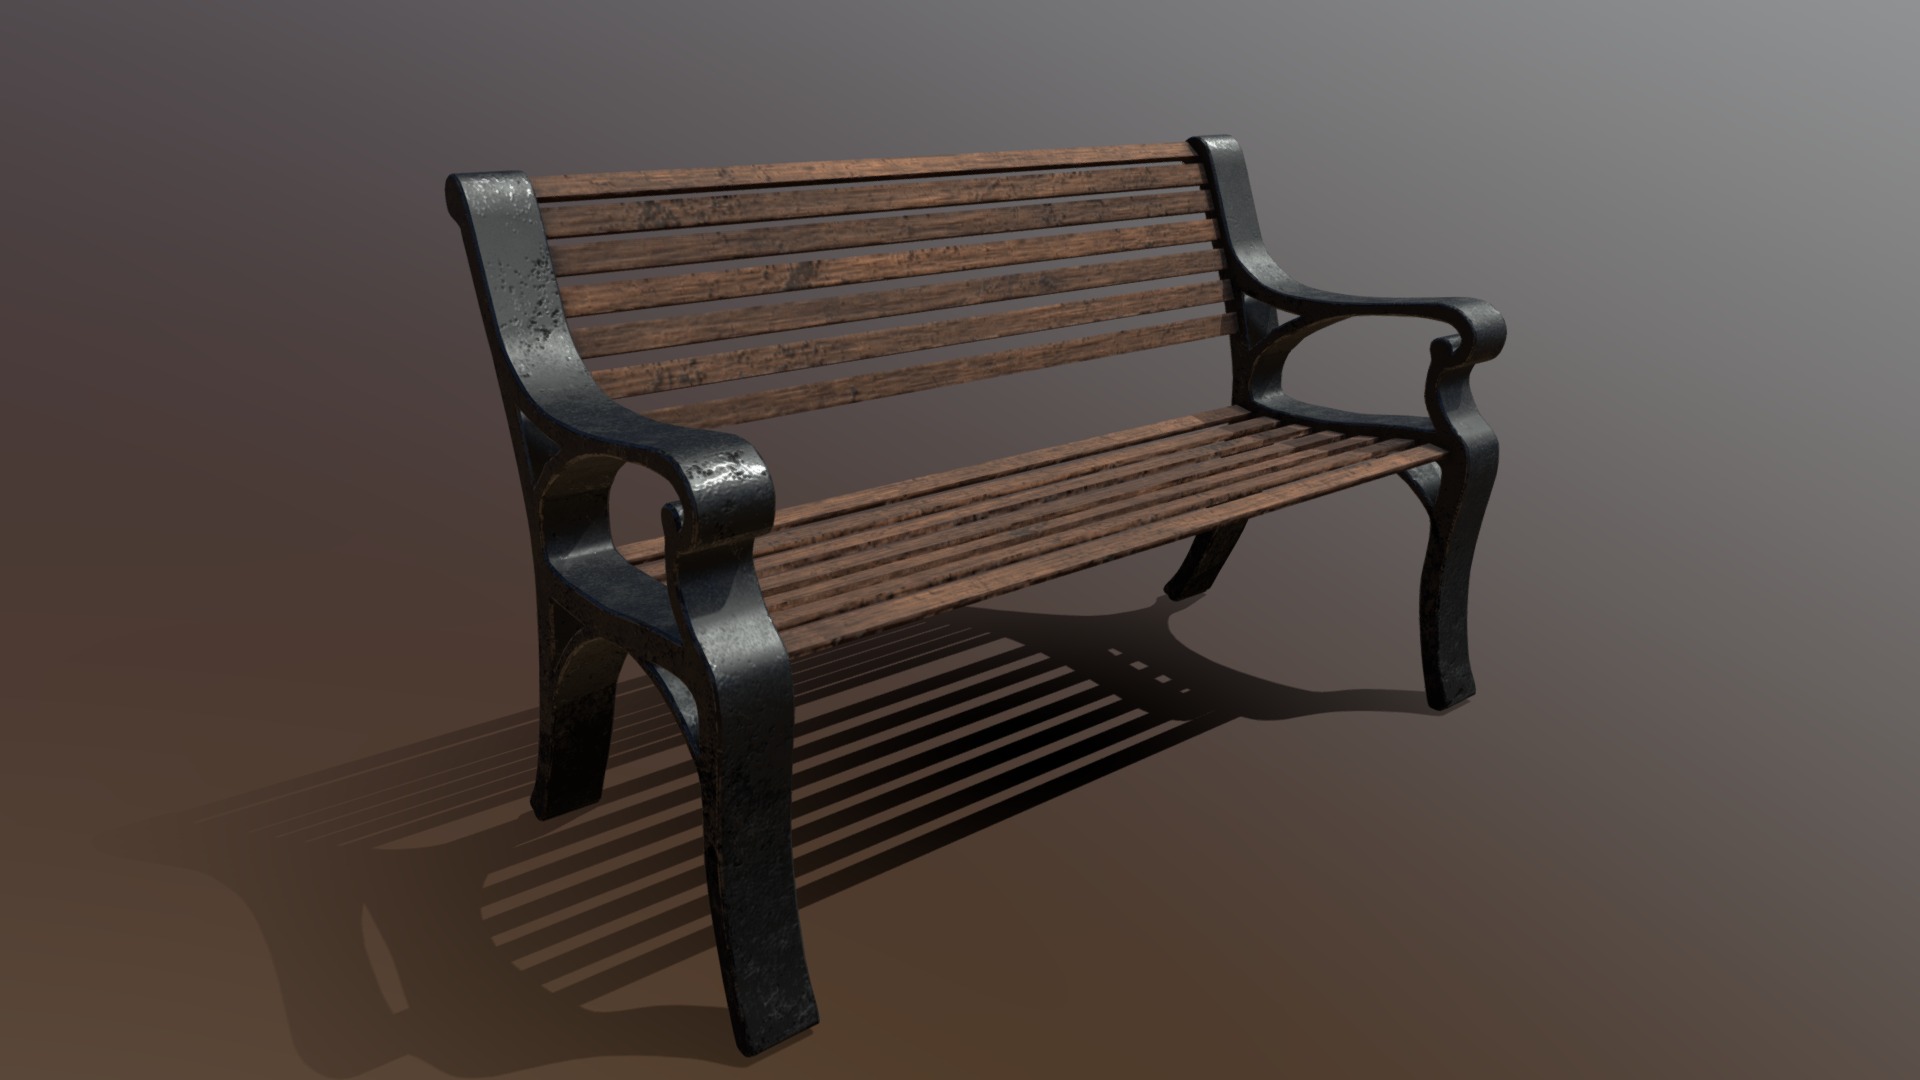 3D model Bench — aged and gritty - This is a 3D model of the Bench -- aged and gritty. The 3D model is about a wooden bench on a white background.